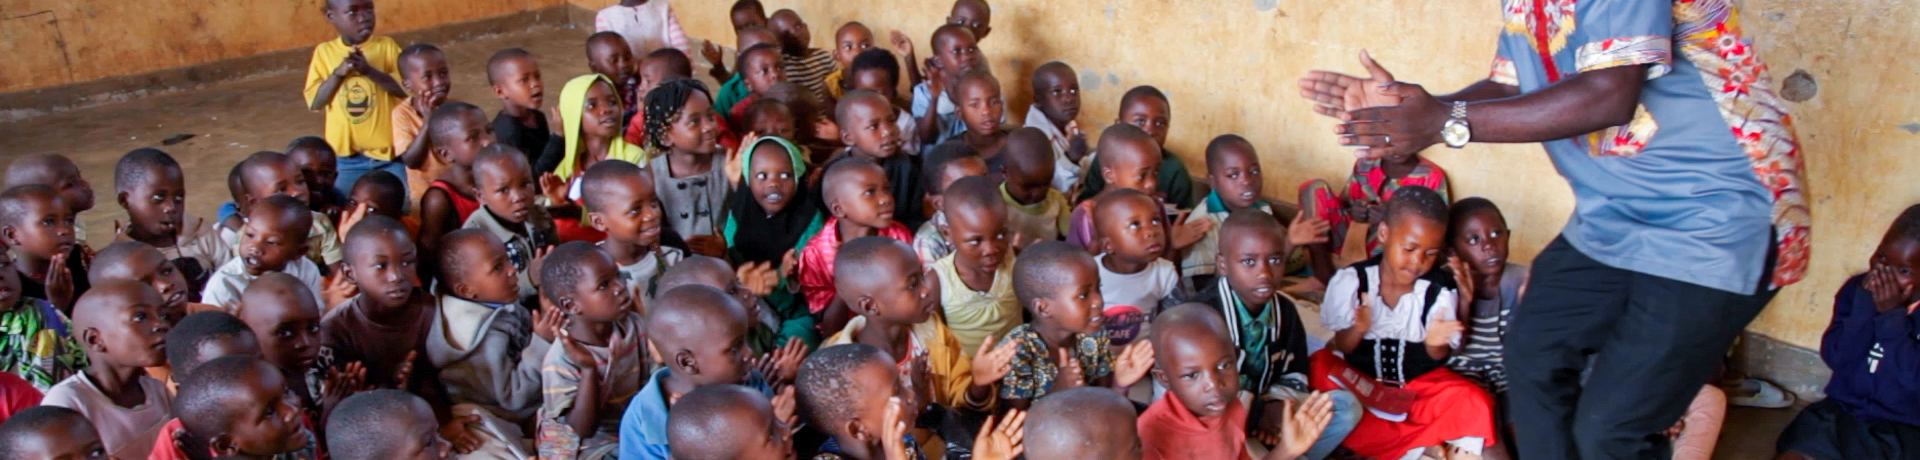 Teacher in front of a class in Uganda. For more information, watch the film "We teach here": https://www.youtube.com/watch?v=9Rk8k-0PVo0&t=116s.